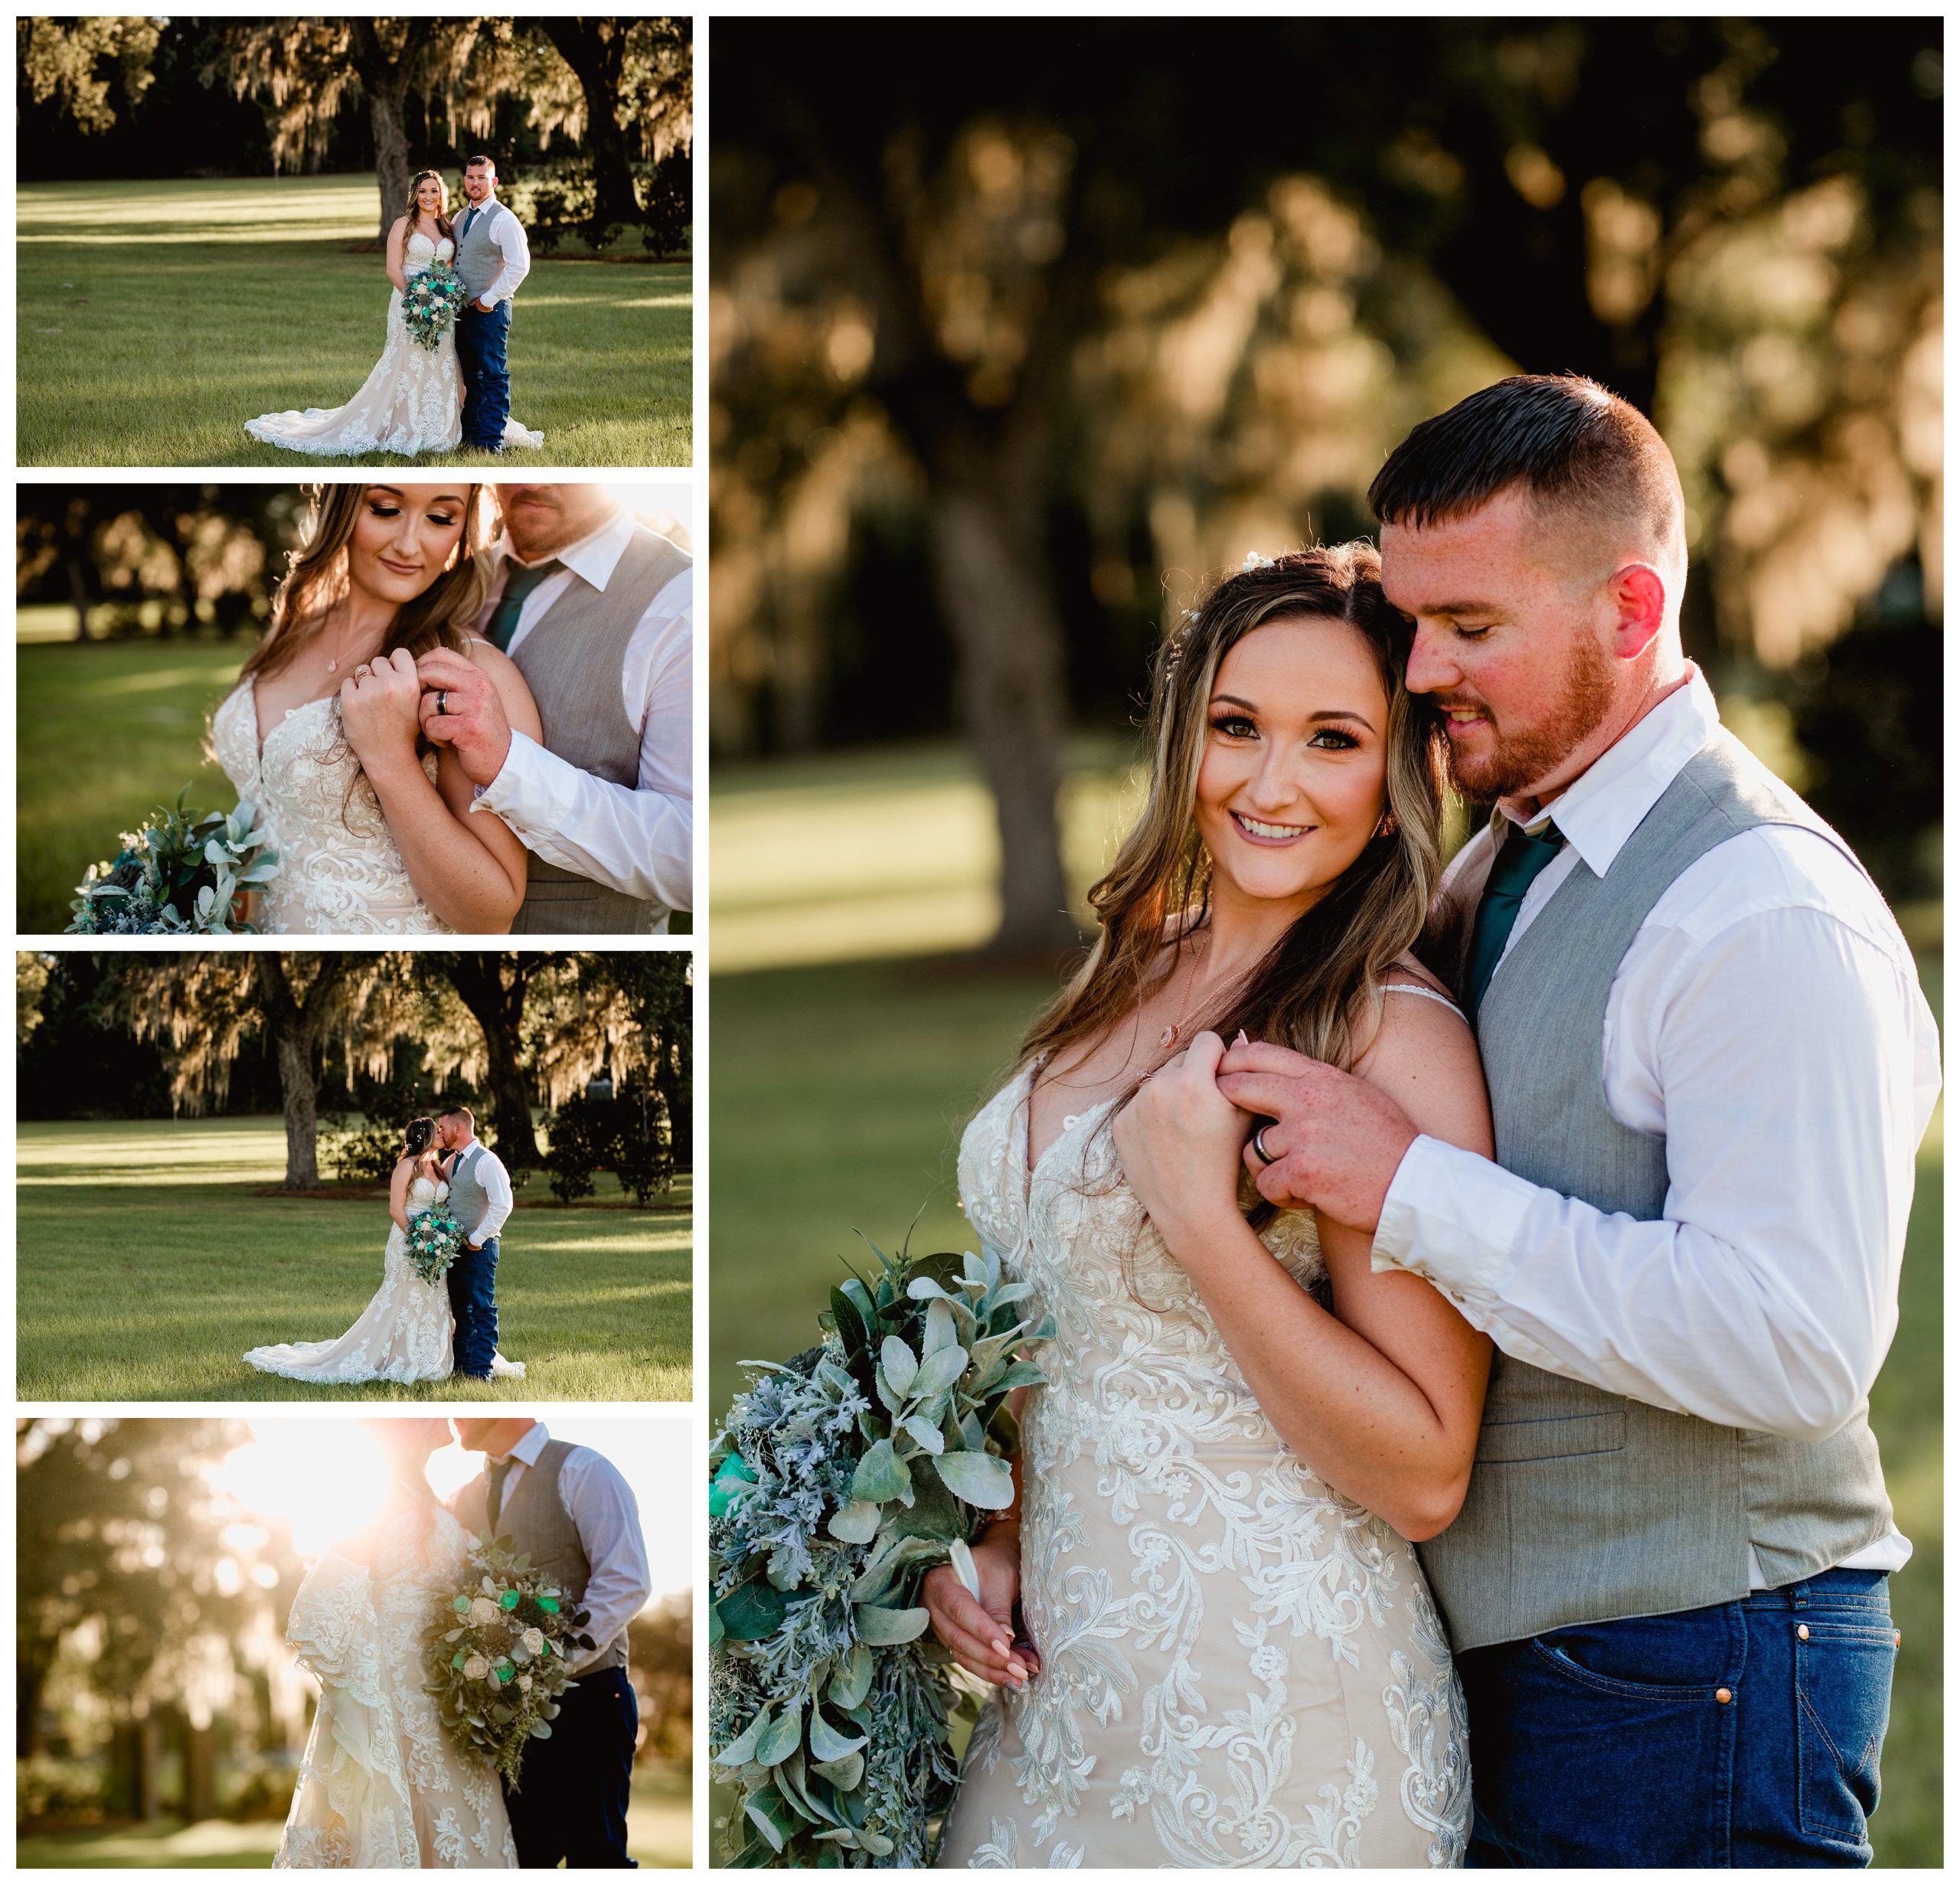 Professional lifestyle wedding photographer poses couples naturally and intimately.